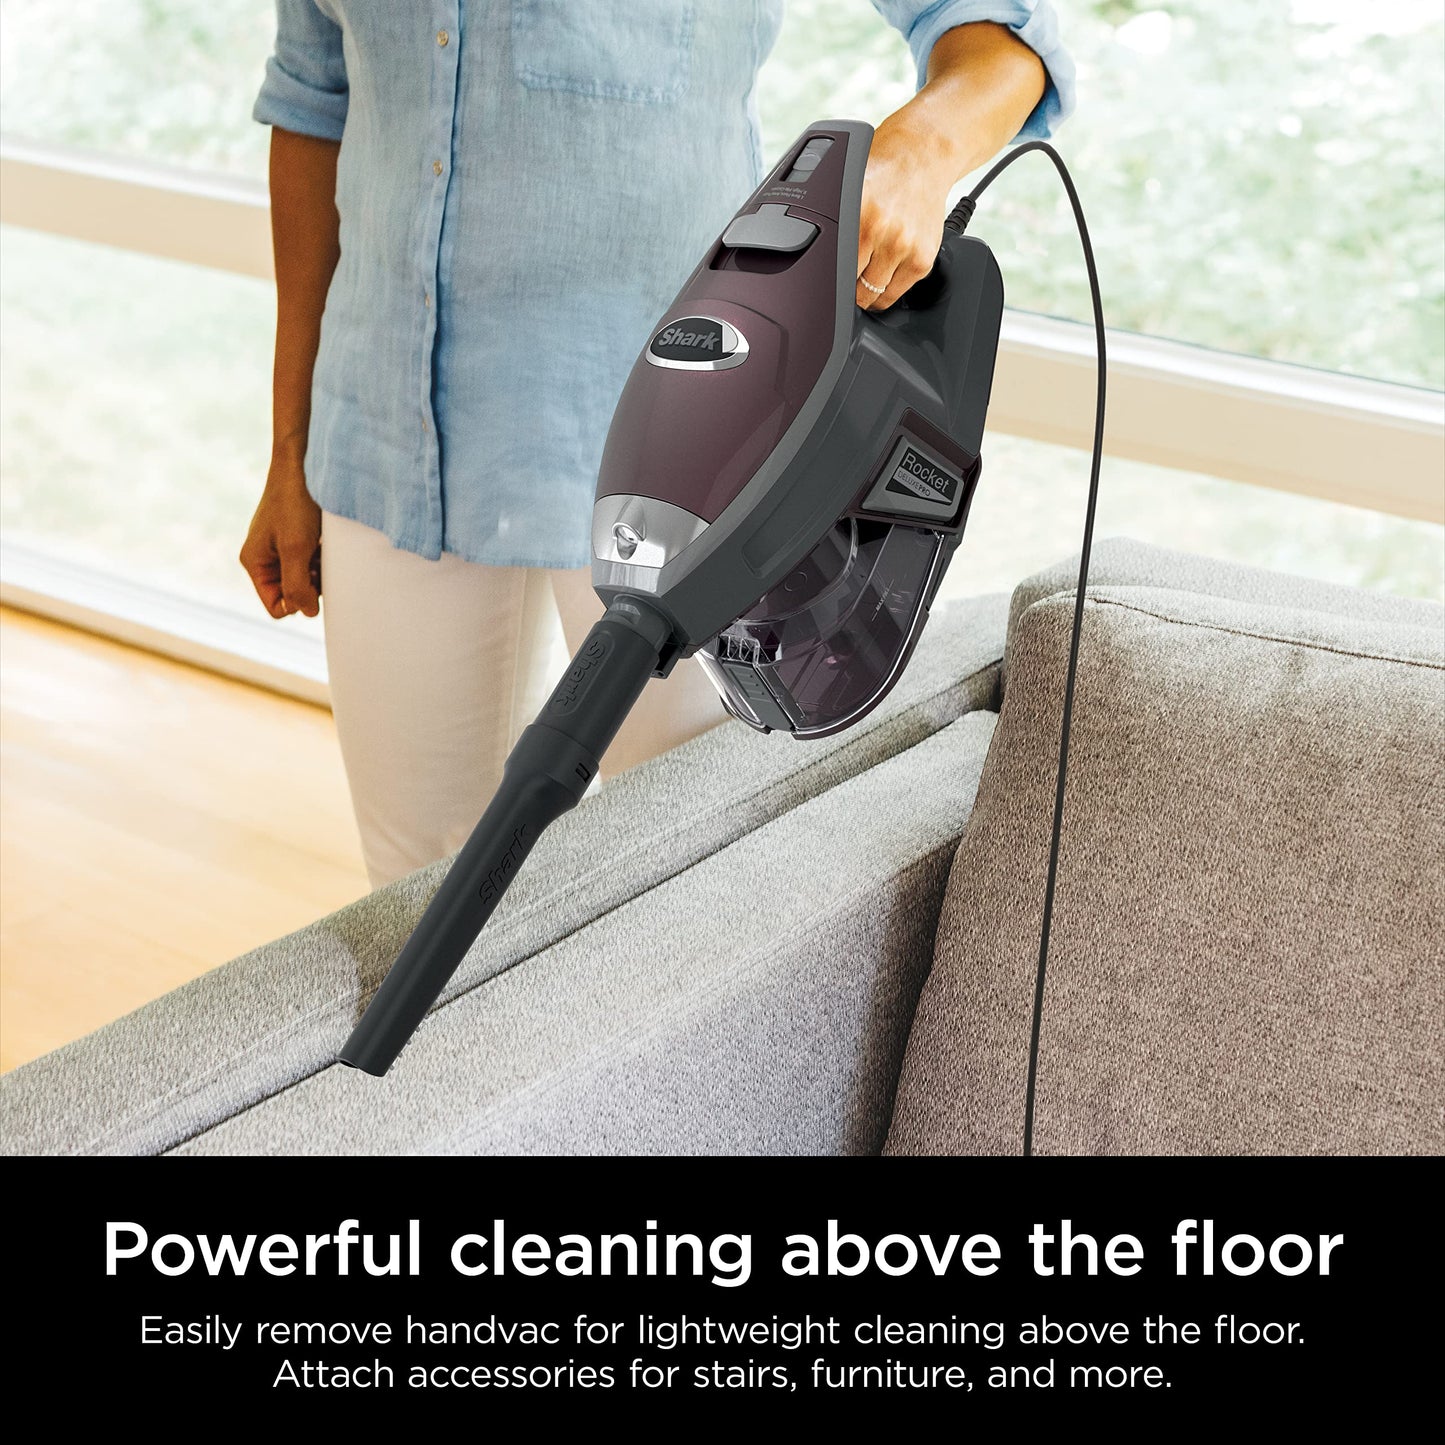 Shark HV322 Rocket Deluxe Pro Corded Stick Vacuum with LED Headlights, XL Dust Cup, Lightweight, Perfect for Pet Hair Pickup